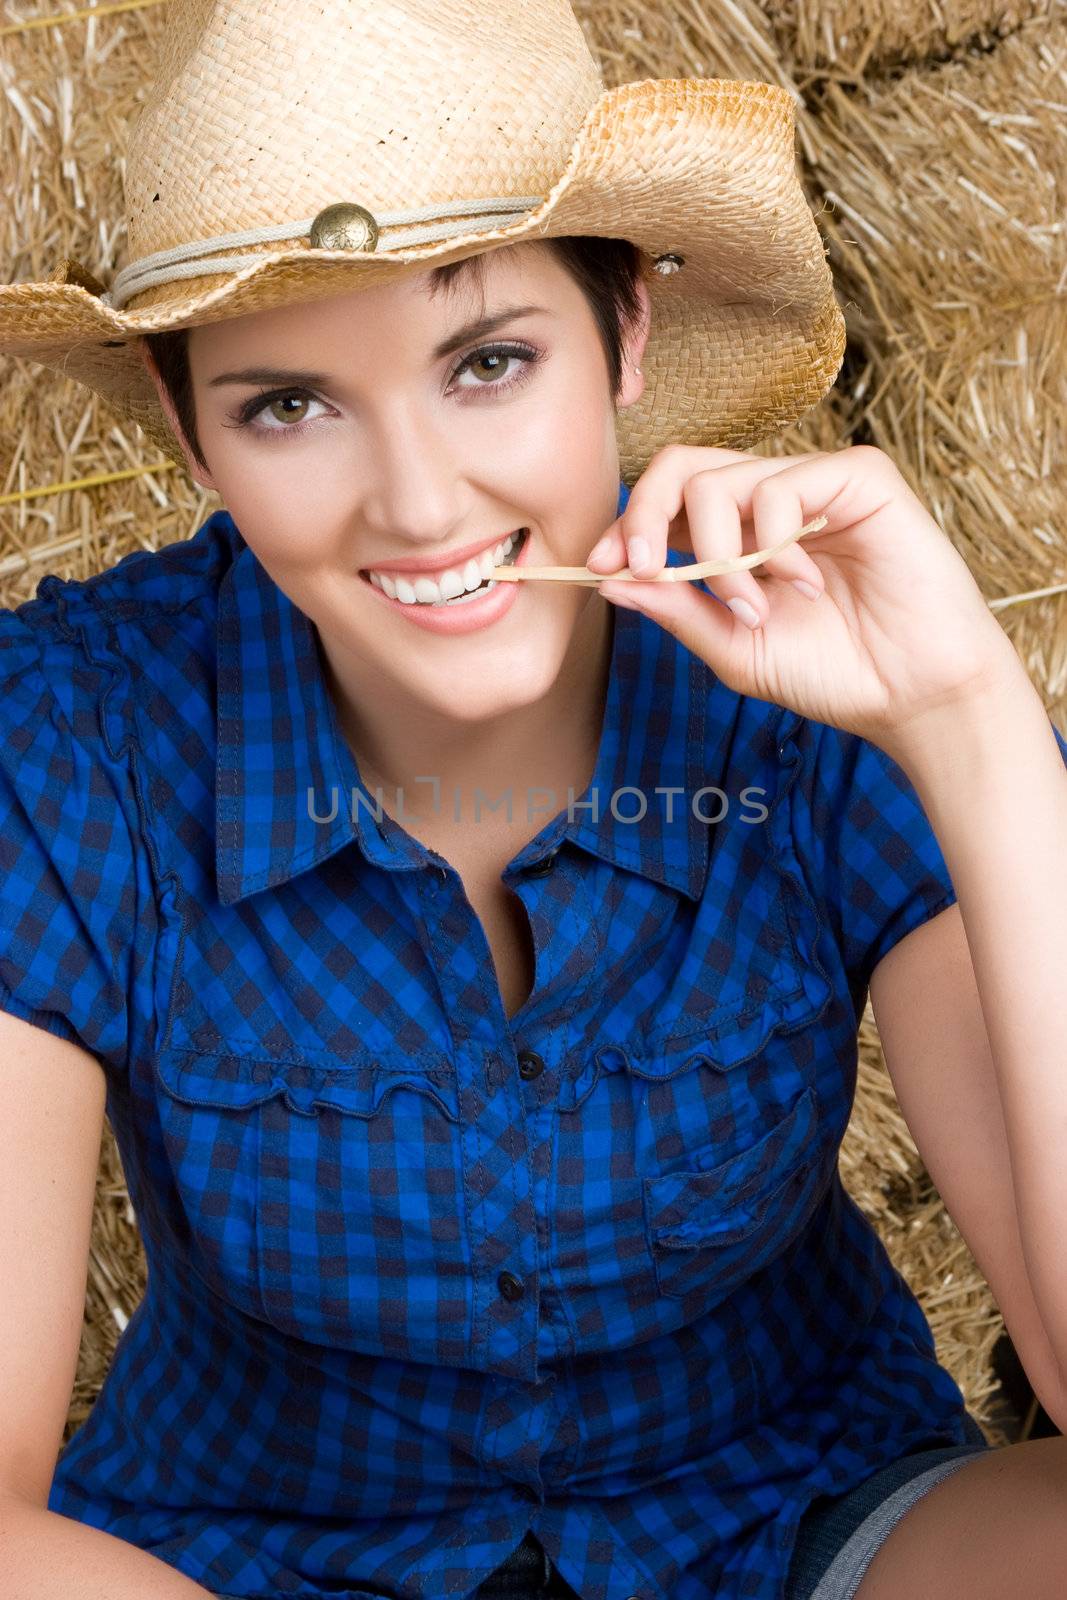 Beautiful country girl in hay